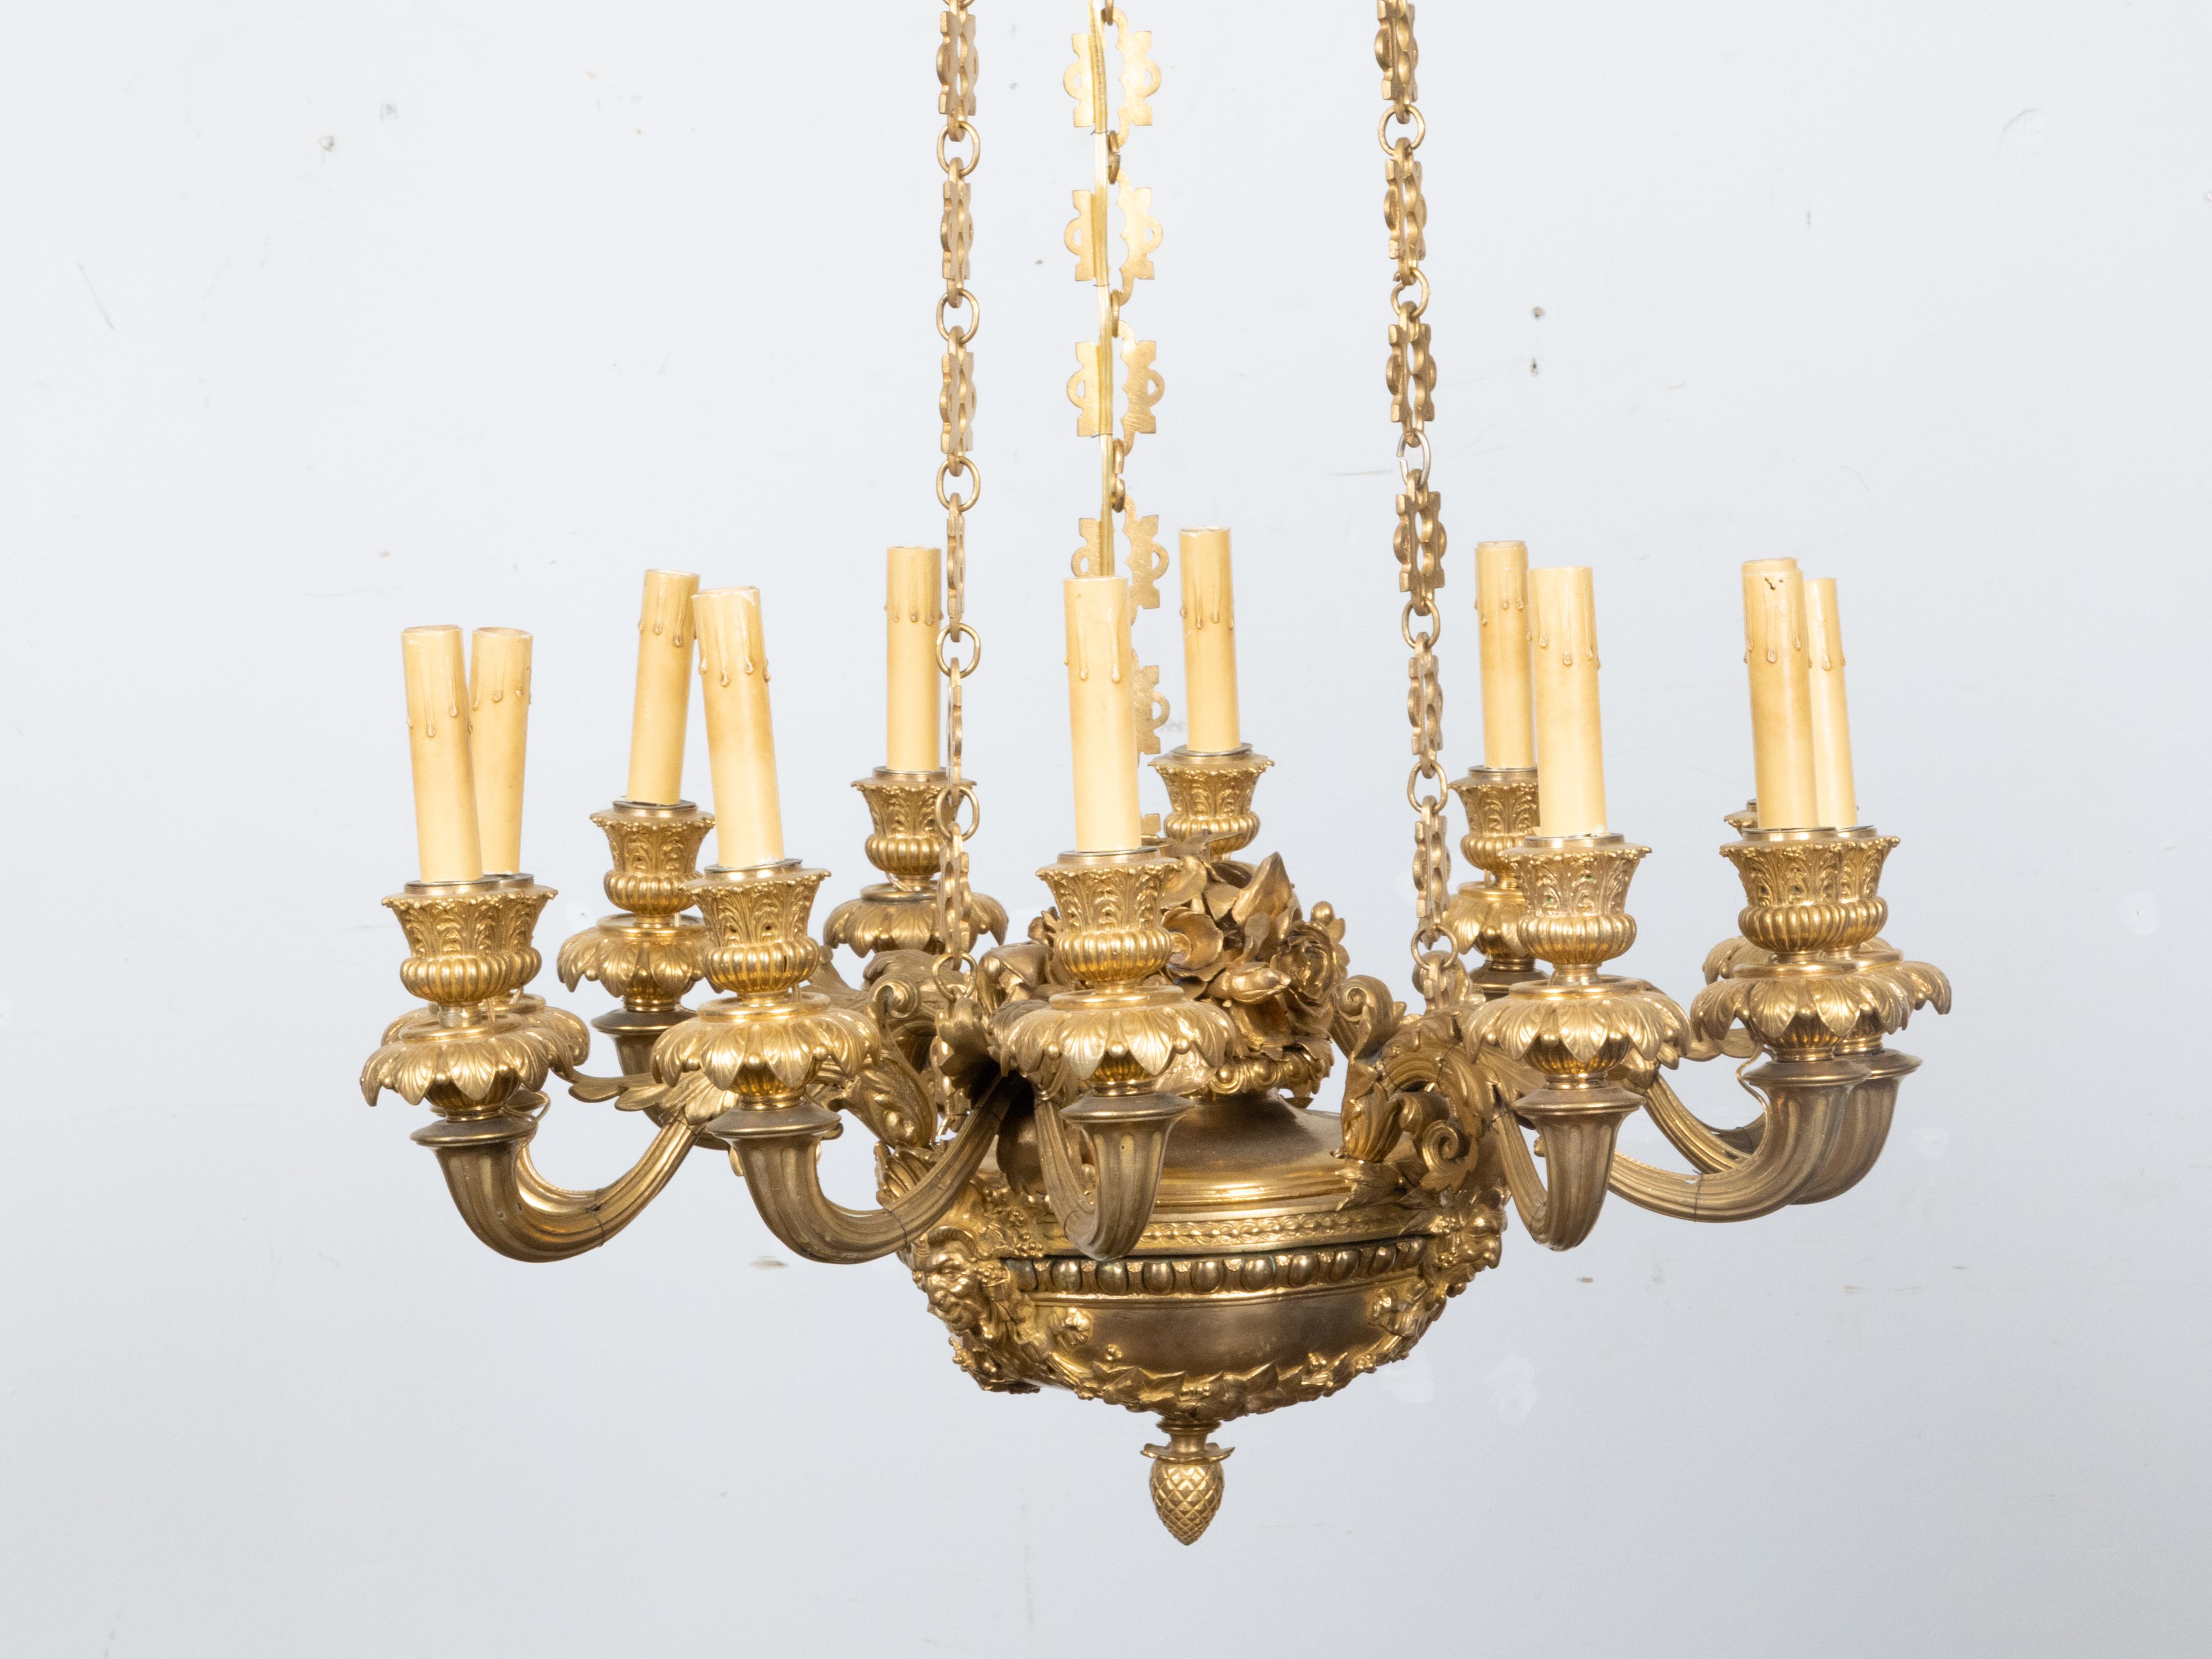 French Napoléon III 19th Century Gilt Bronze 12 Light Chandelier with Mascarons For Sale 2